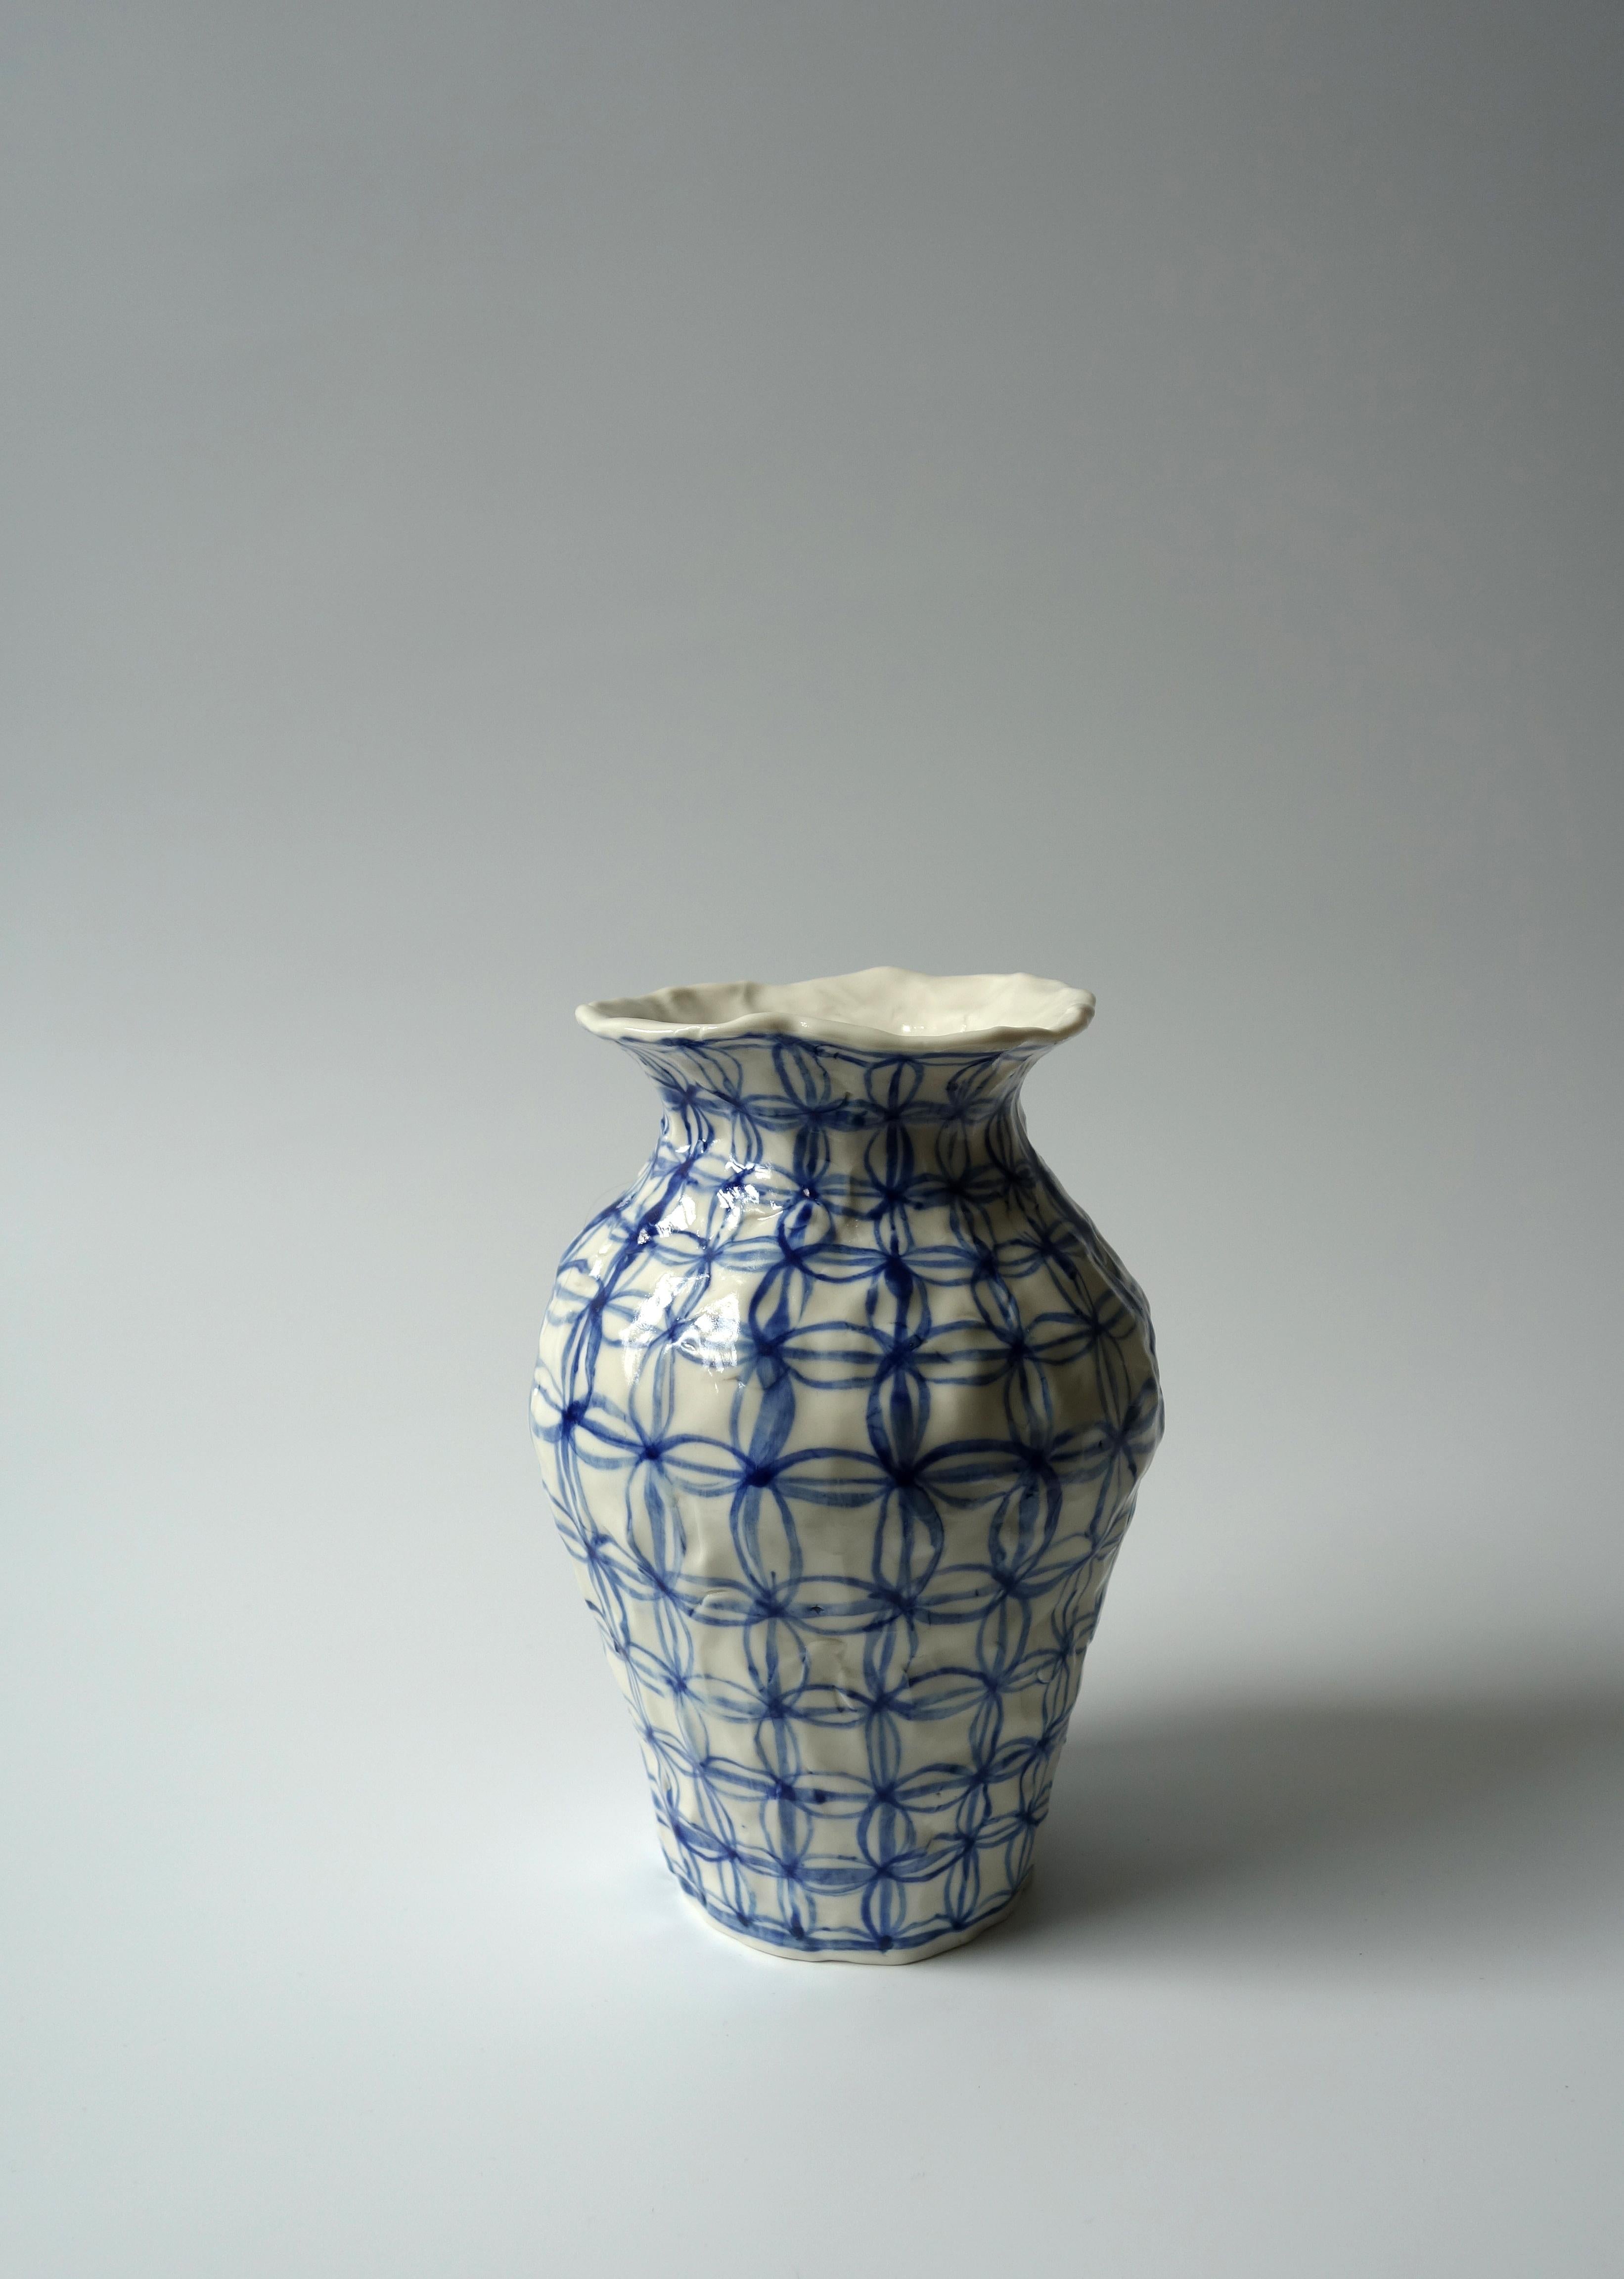 Contemporary Vase with Checkers by Caroline Harrius For Sale